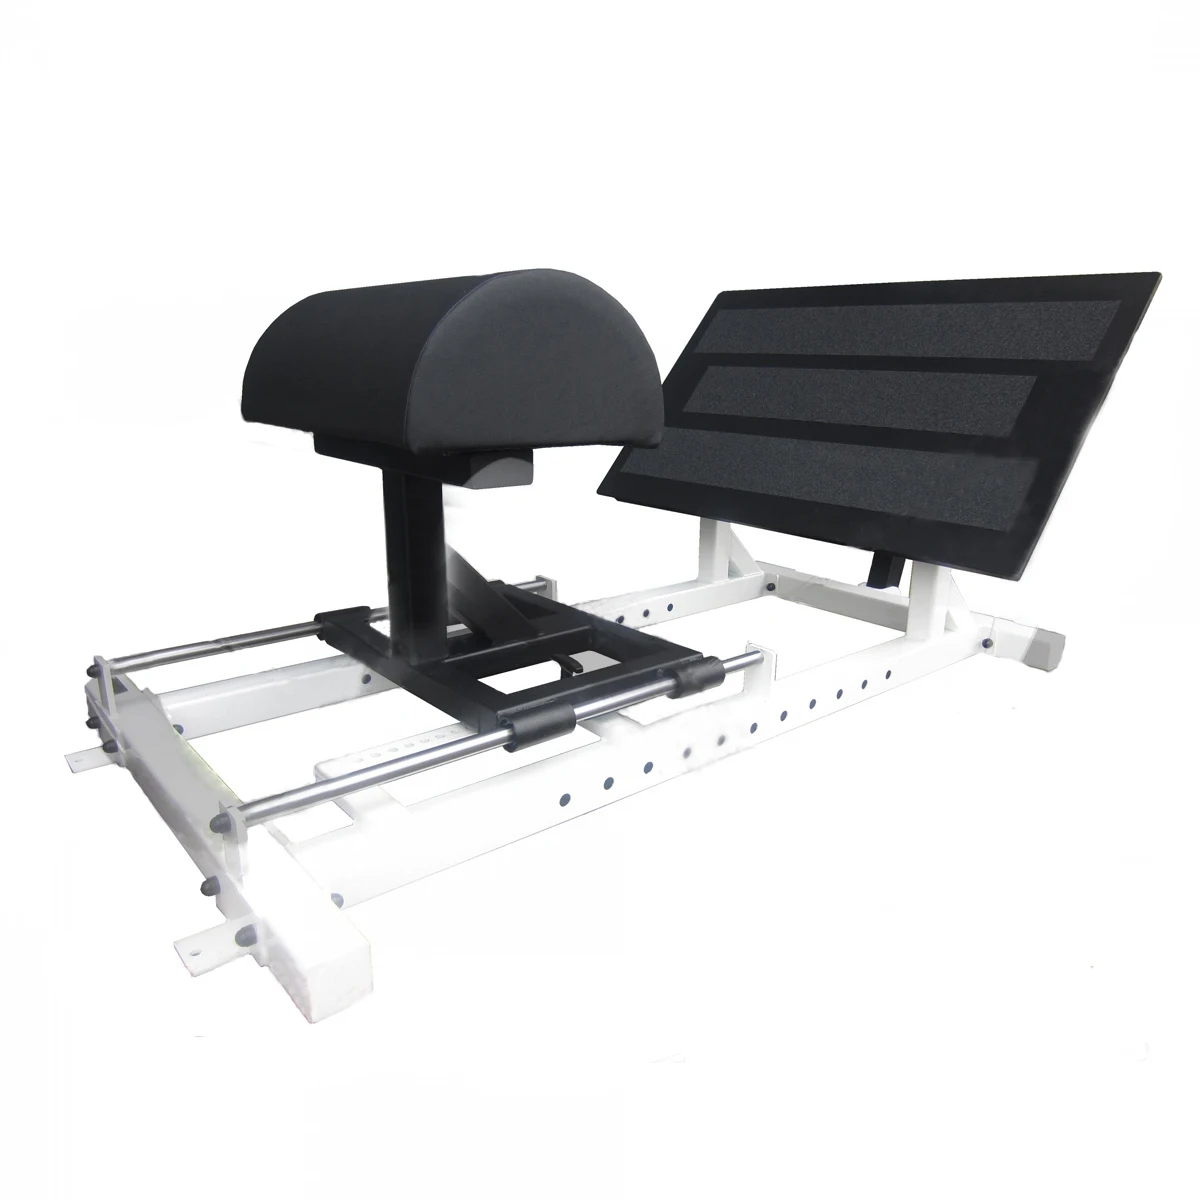 Lee Precision Bench Plate Now With Steel Base Block Gunsmithing